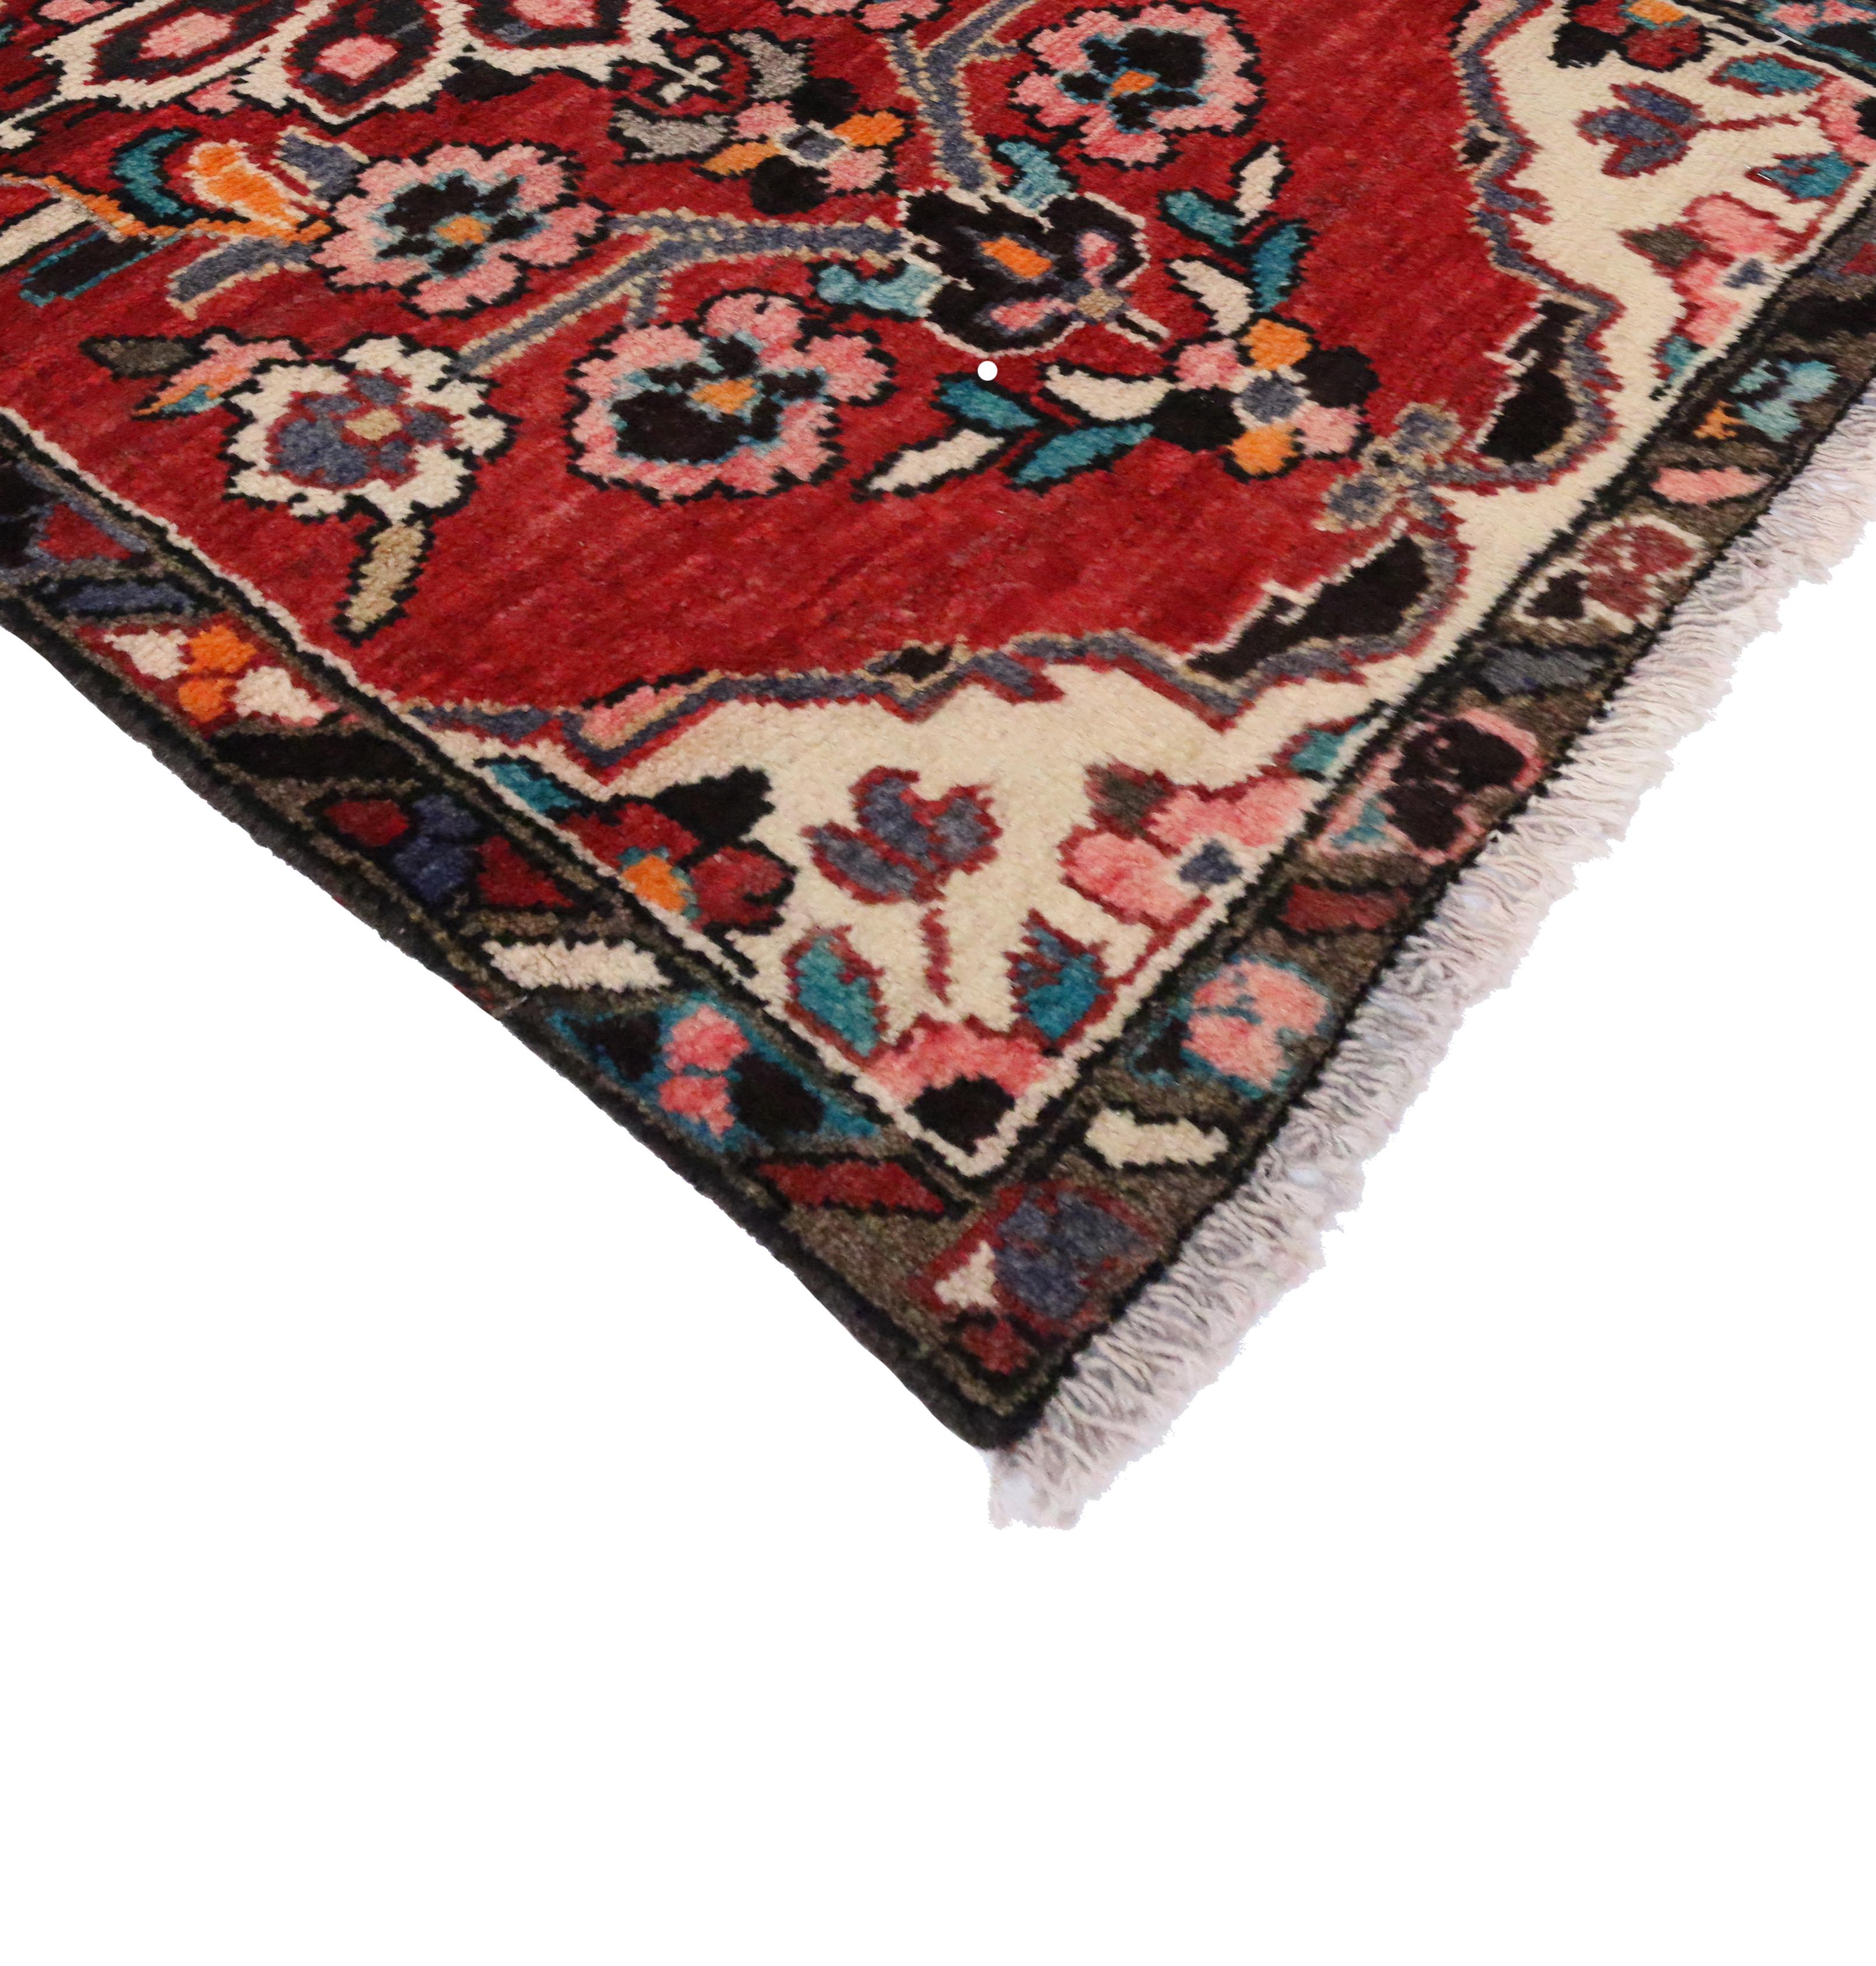 76206, vintage Persian Hamadan Accent rug, small Persian rug. This hand-knotted wool vintage Persian Hamadan accent rug features a stylized and colorful floral design on an abrashed scarlet red field. It is enclosed by ivory spandrels and a charcoal